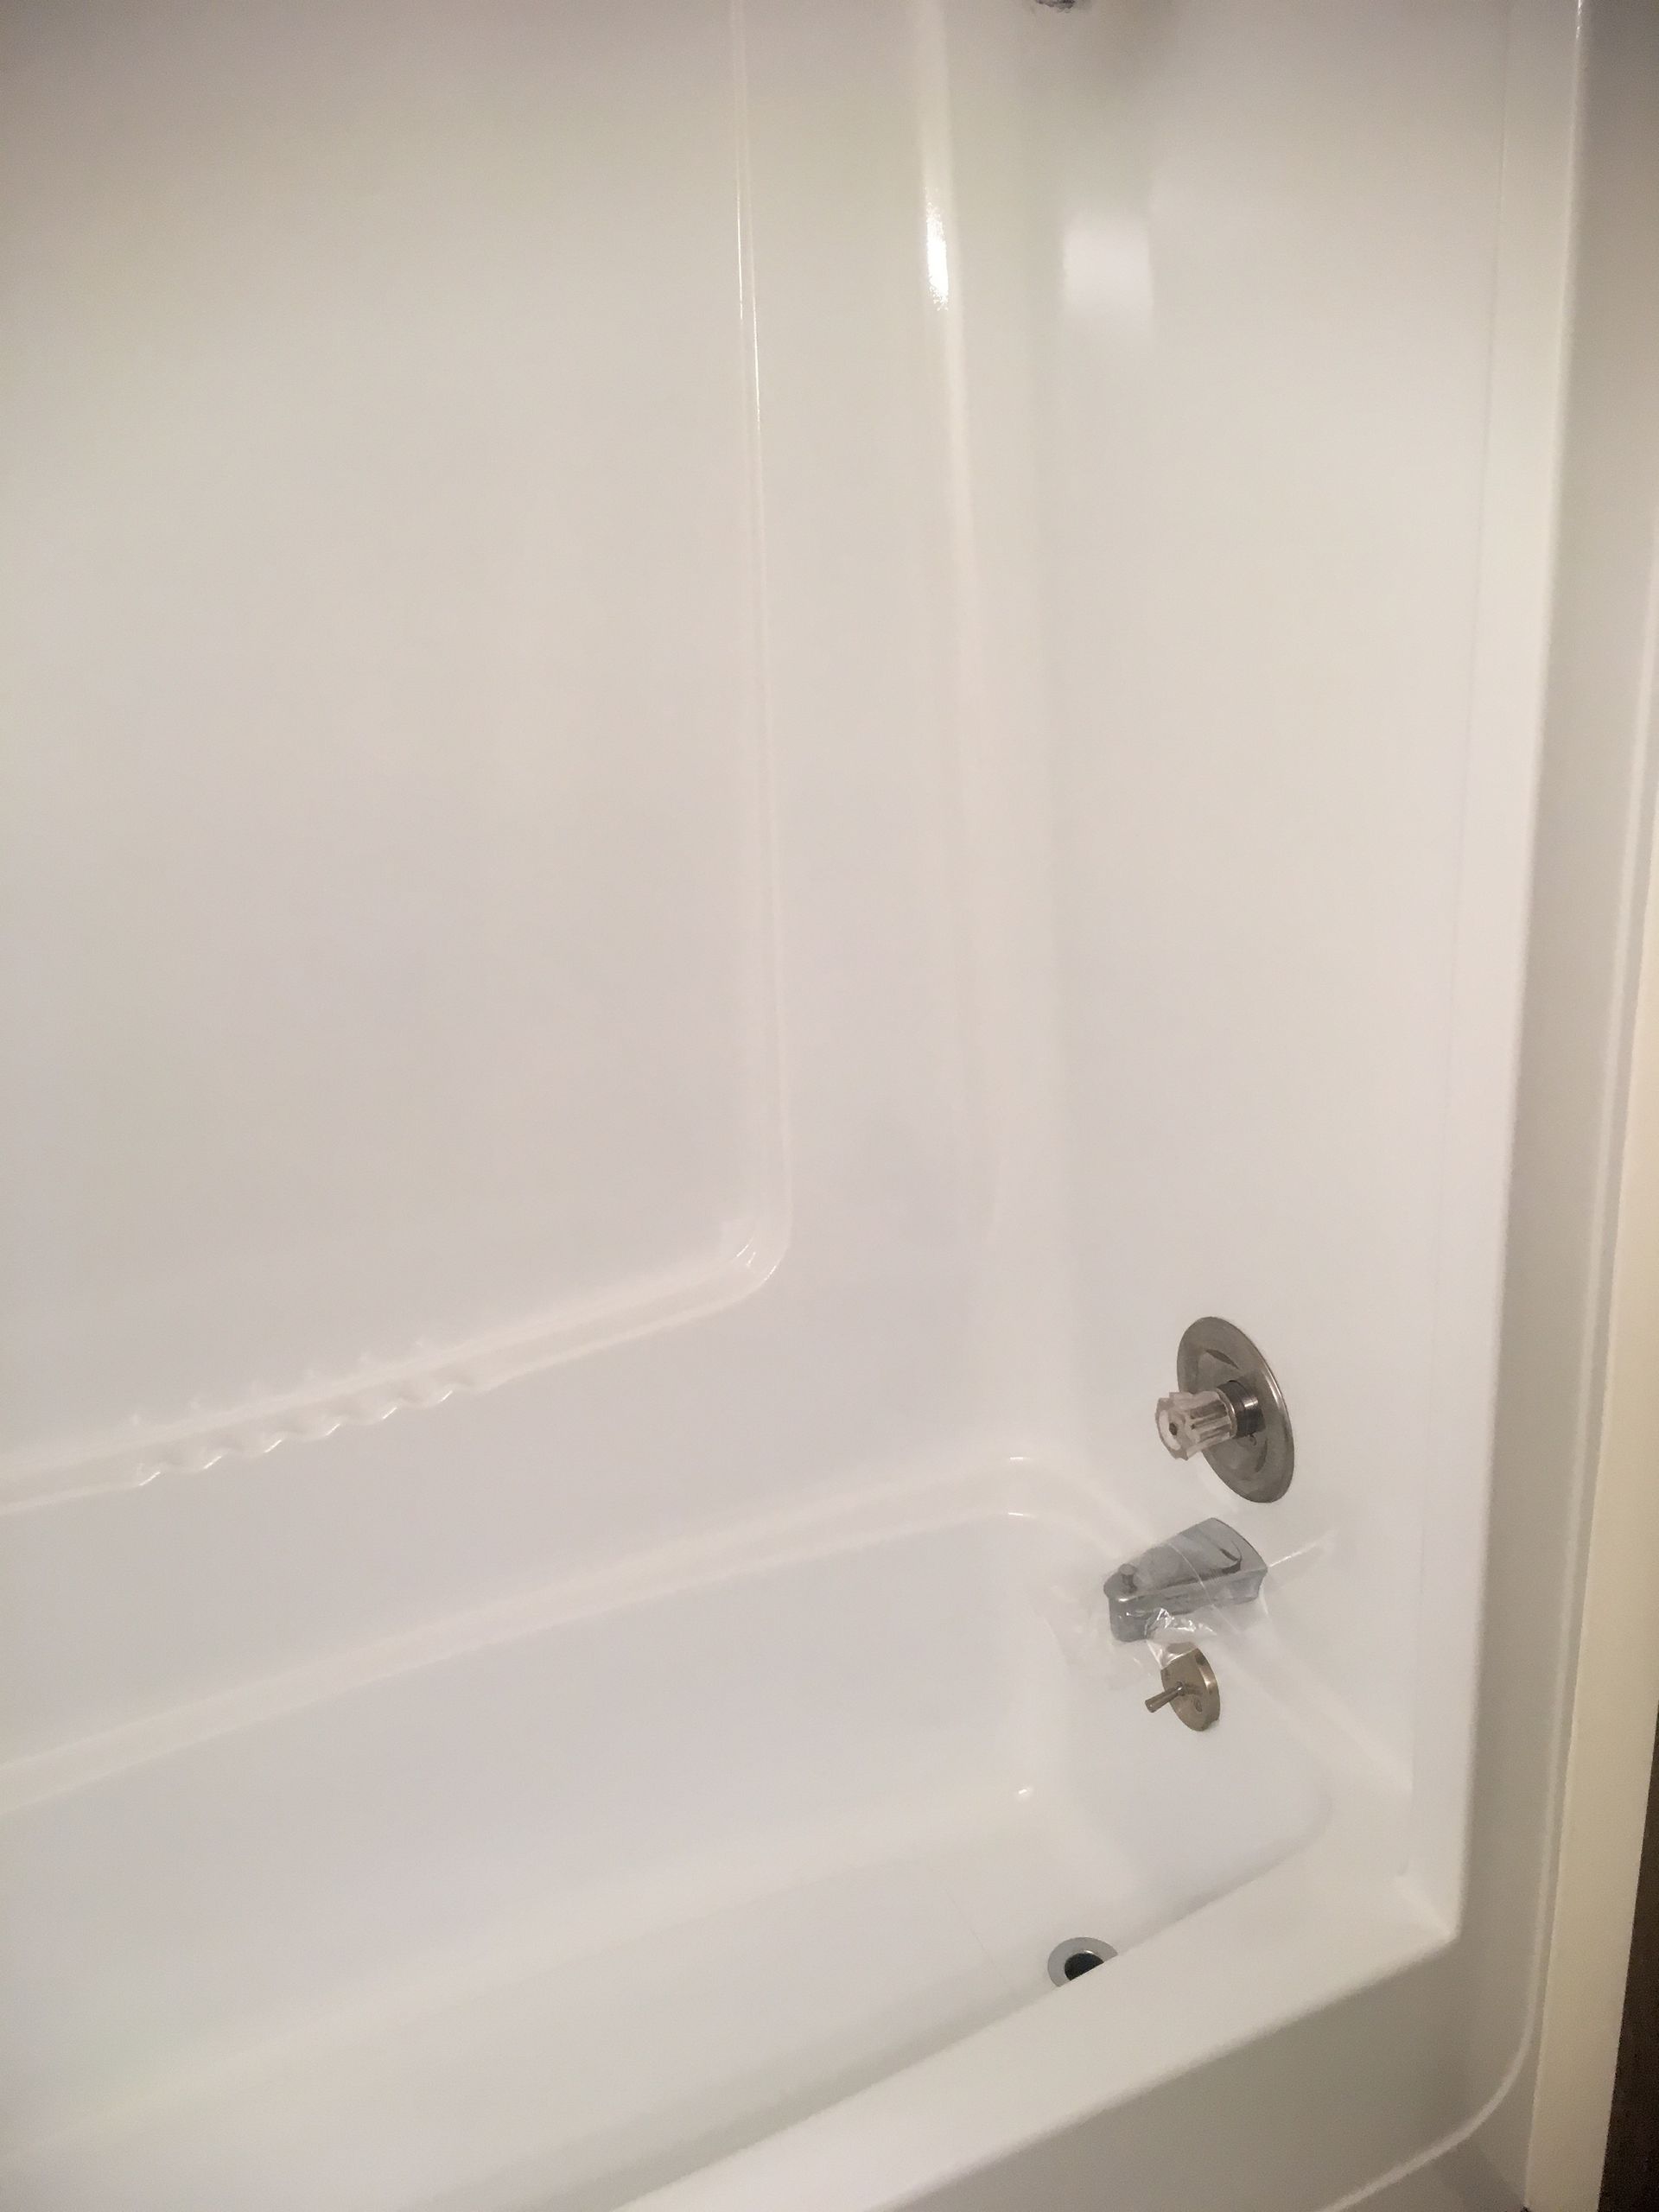 After Refinishing of Bathtub with Shower - Central Illinois | Surface Savers